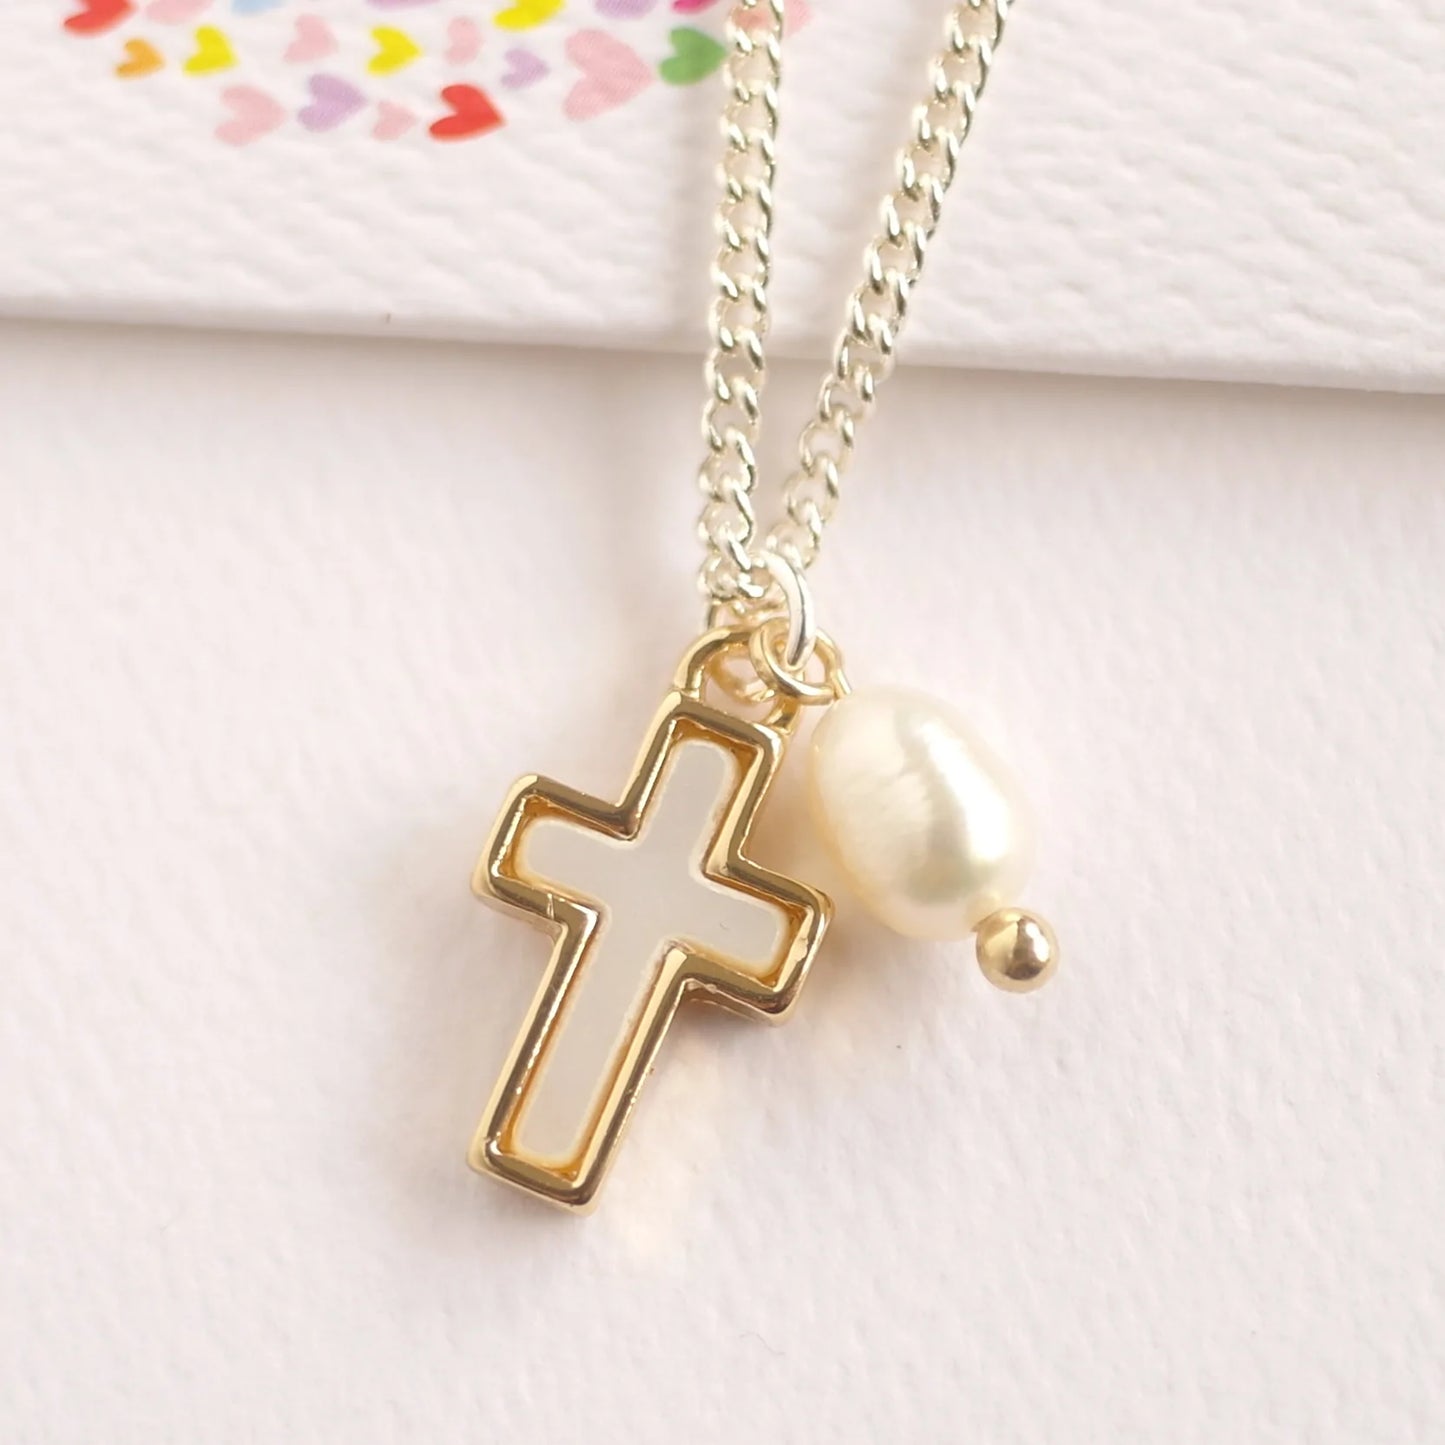 Cross Pendant Necklace with Pearl